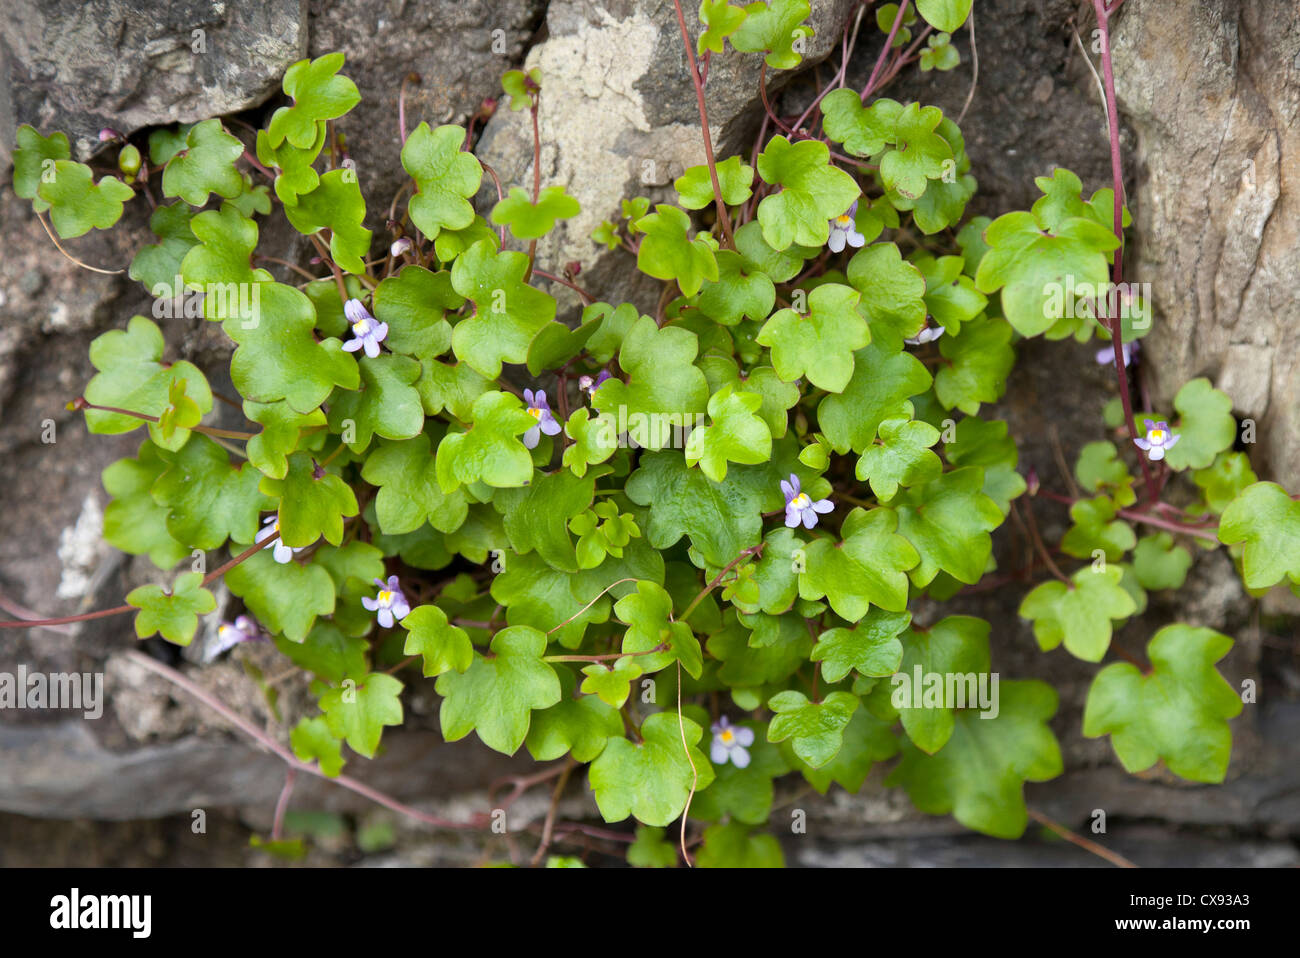 Ivy-leaved Toadflax, Mother of Thousands, Kenilworth Ivy, Pennywort. Cymbalaria muralis, growing on a stone wall, Wales. UK Stock Photo